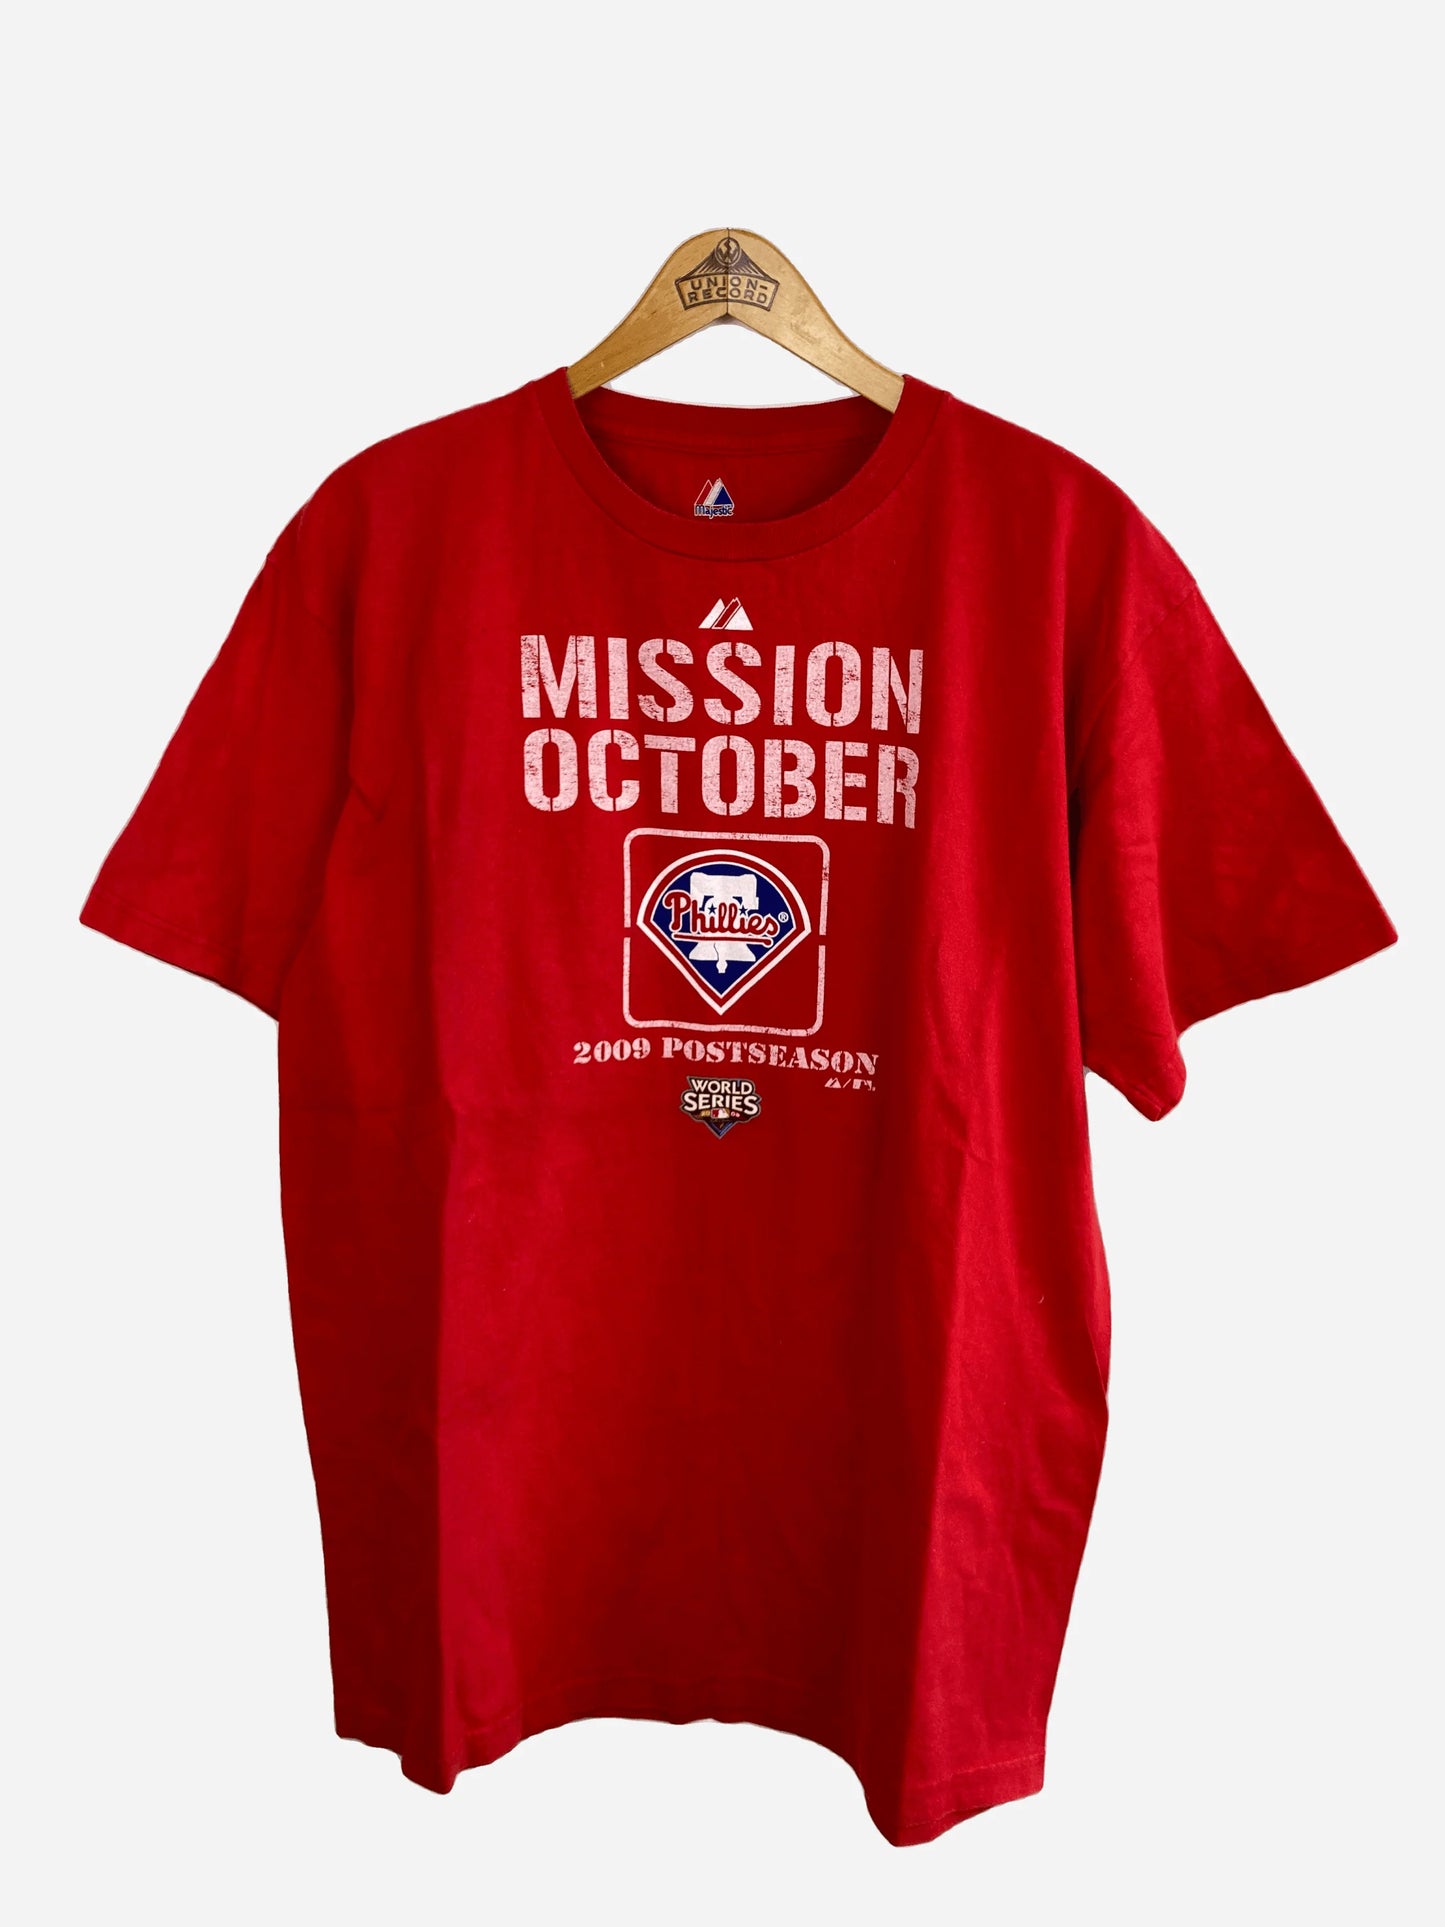 „Phillies Mission October“ T-Shirt (L)